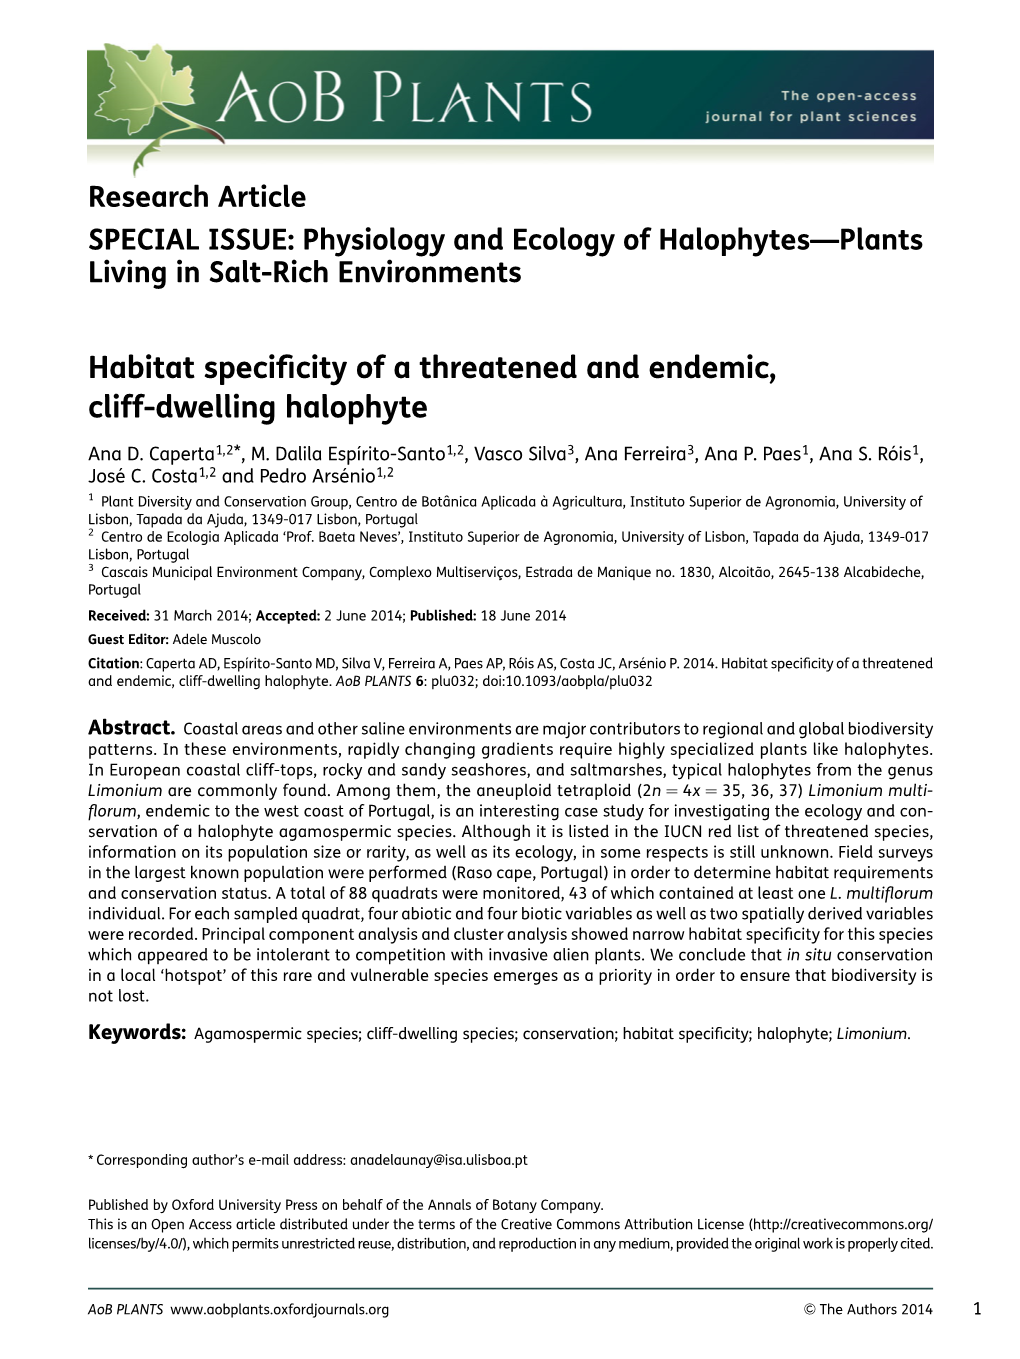 Habitat Specificity of a Threatened and Endemic, Cliff-Dwelling Halophyte